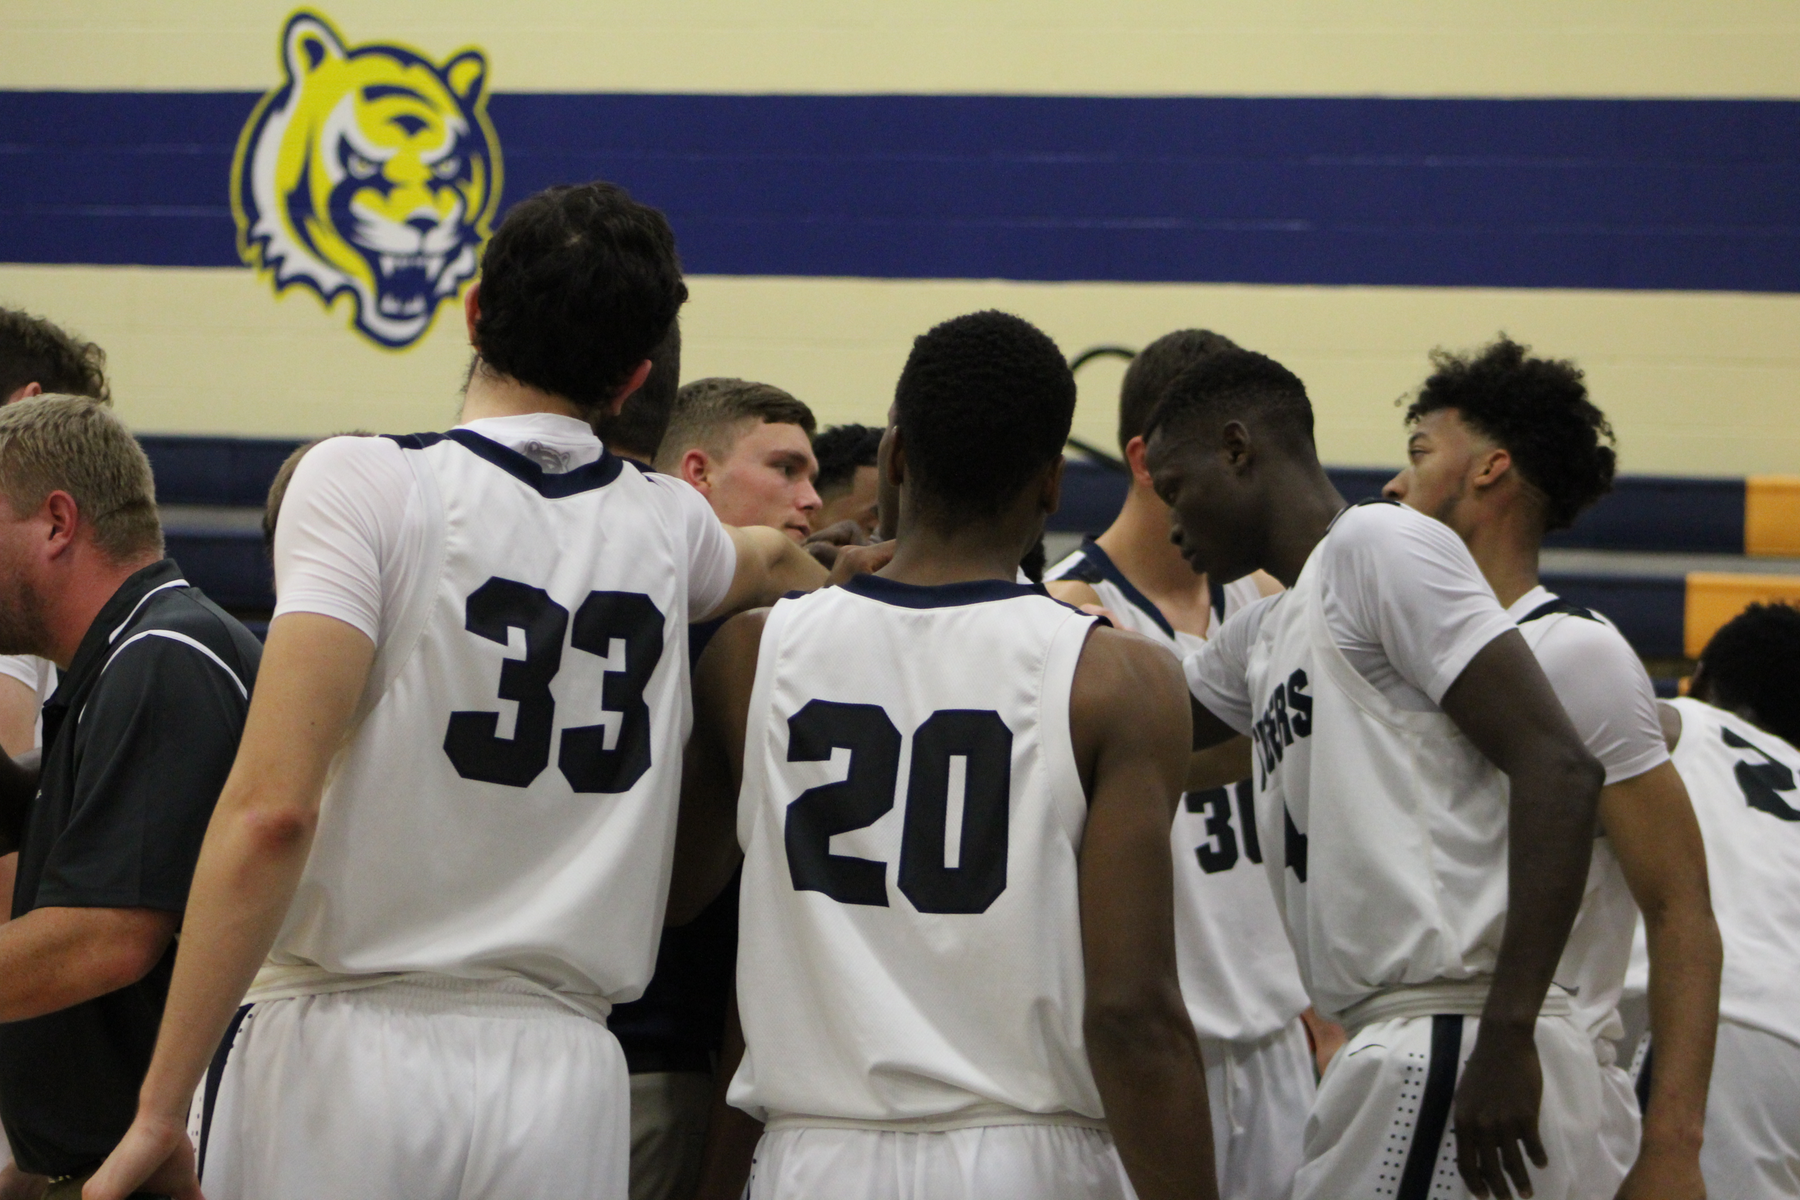 Tigers fall down the stretch to Kirkwood, 78-75